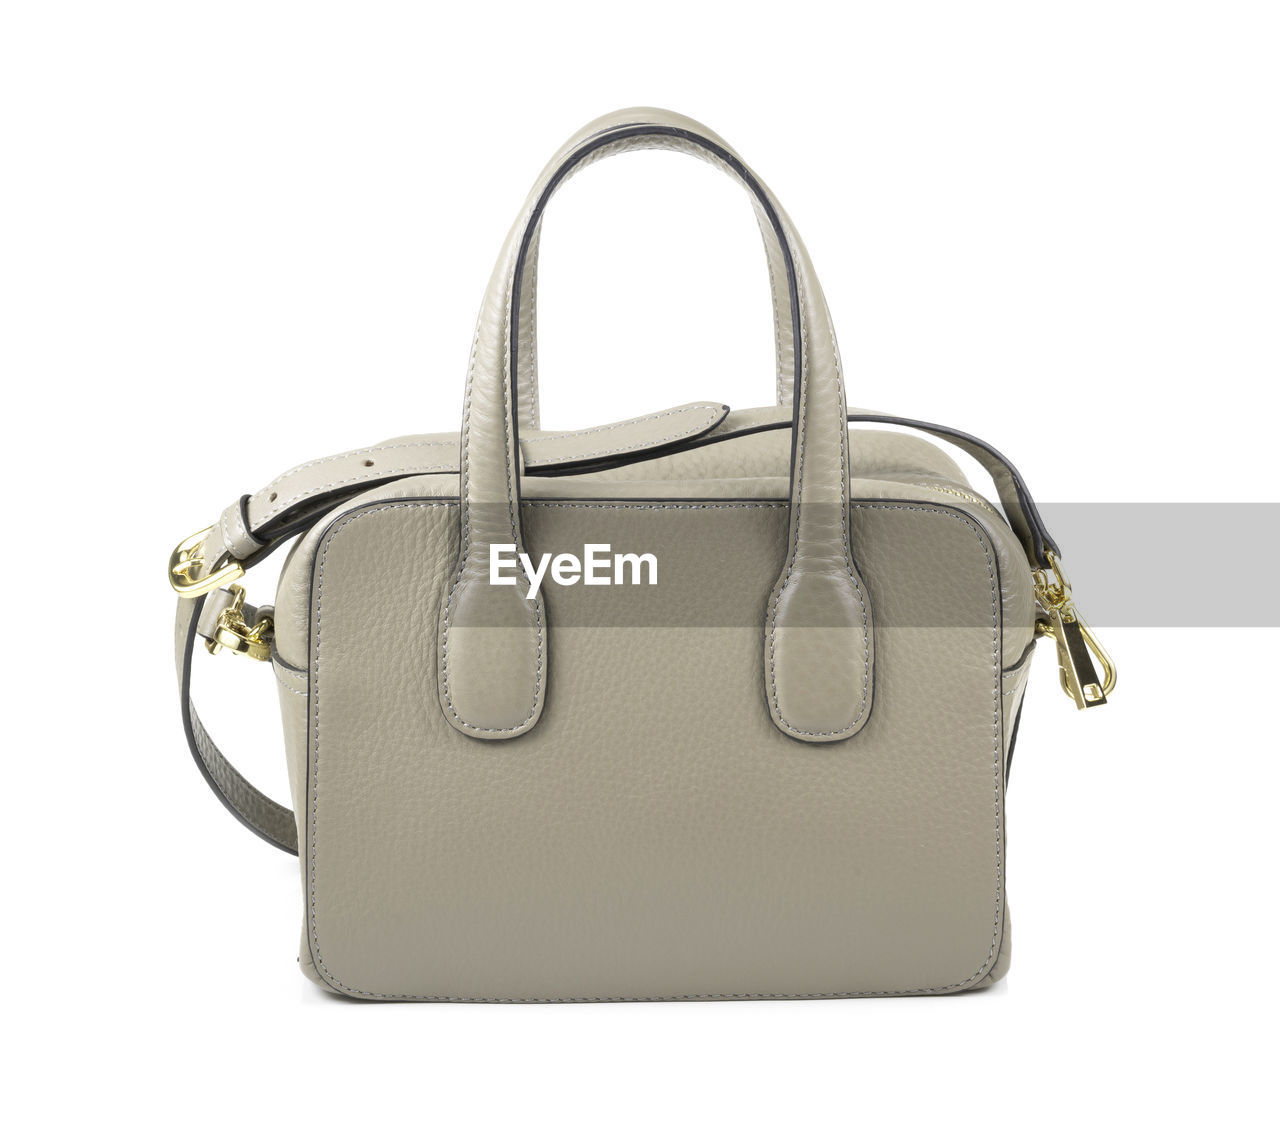 bag, handbag, cut out, white background, fashion accessory, shoulder bag, fashion, luggage, handle, studio shot, travel, suitcase, purse, single object, personal accessory, luggage and bags, indoors, no people, holiday, tote bag, leather, brown, vacation, trip, carrying, clothing, zipper